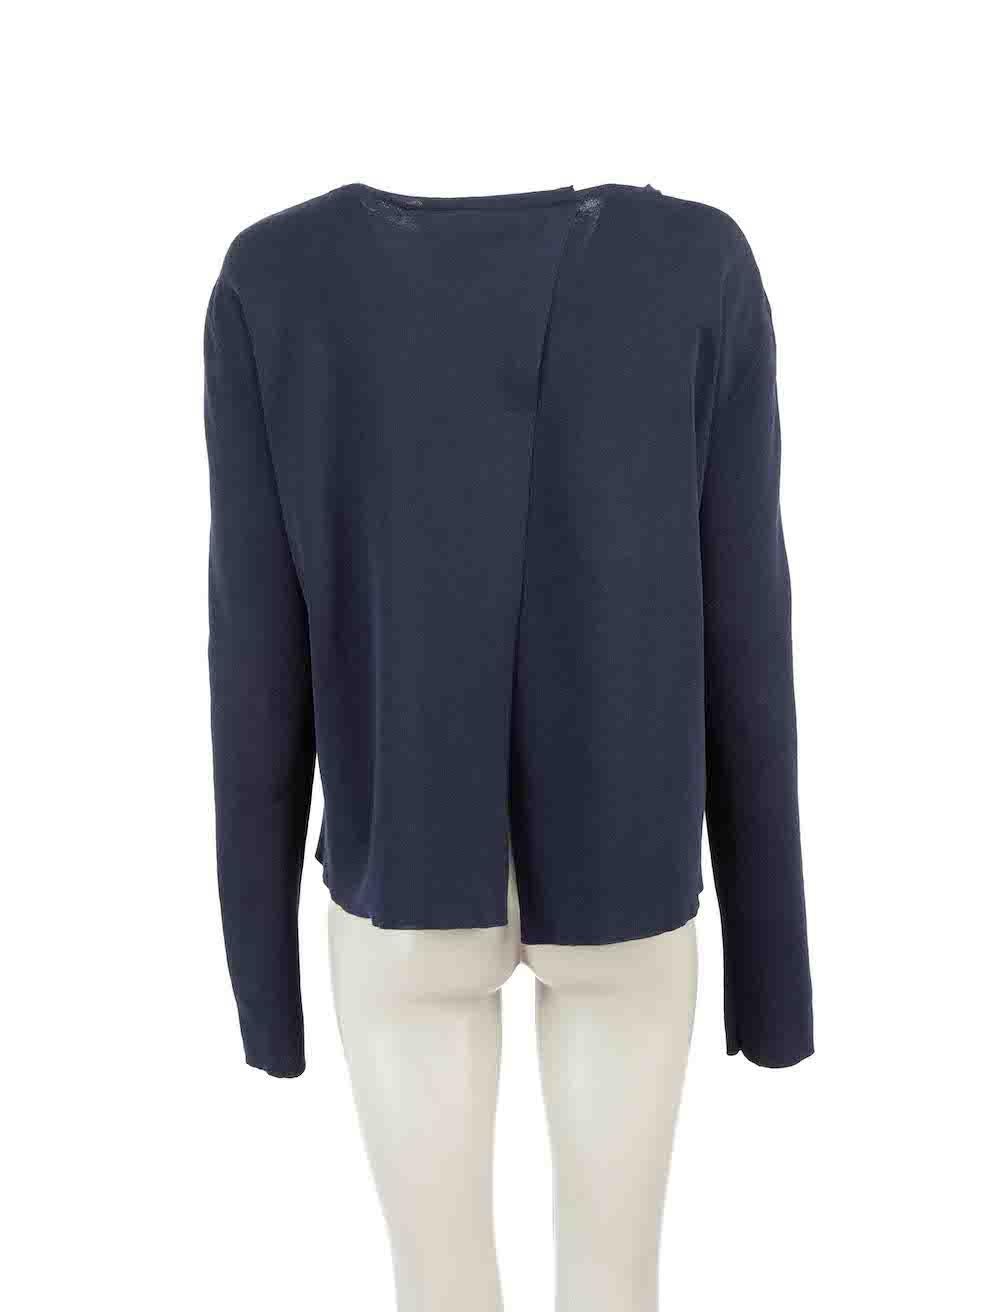 Marni Navy Button Detail Back Slit Jumper Size S In Excellent Condition For Sale In London, GB